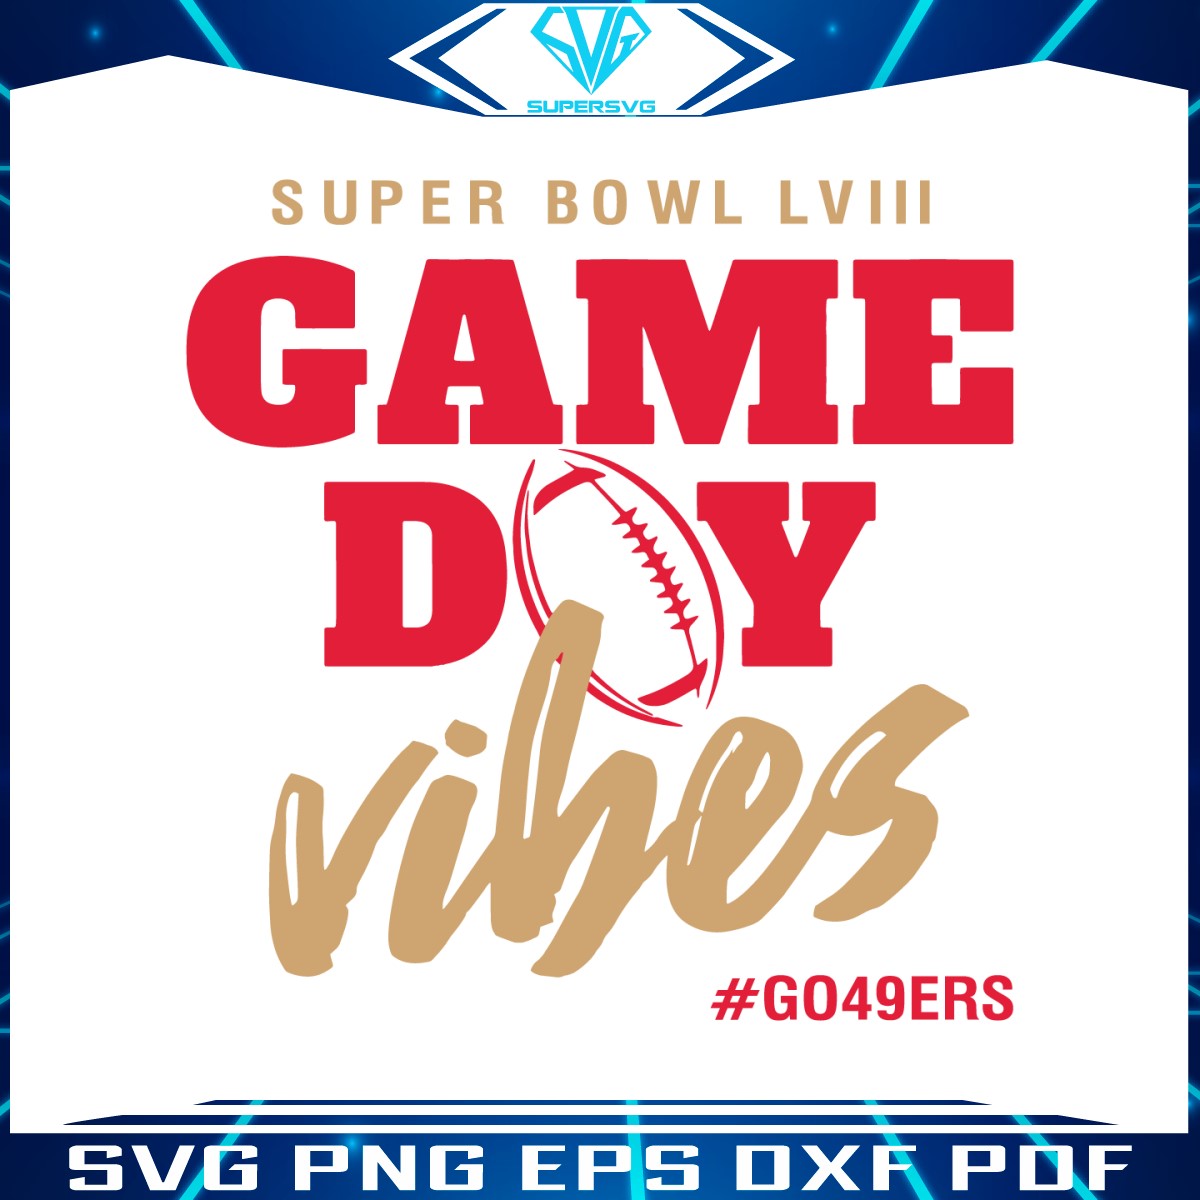 super-bowl-game-day-vibes-go-49ers-svg